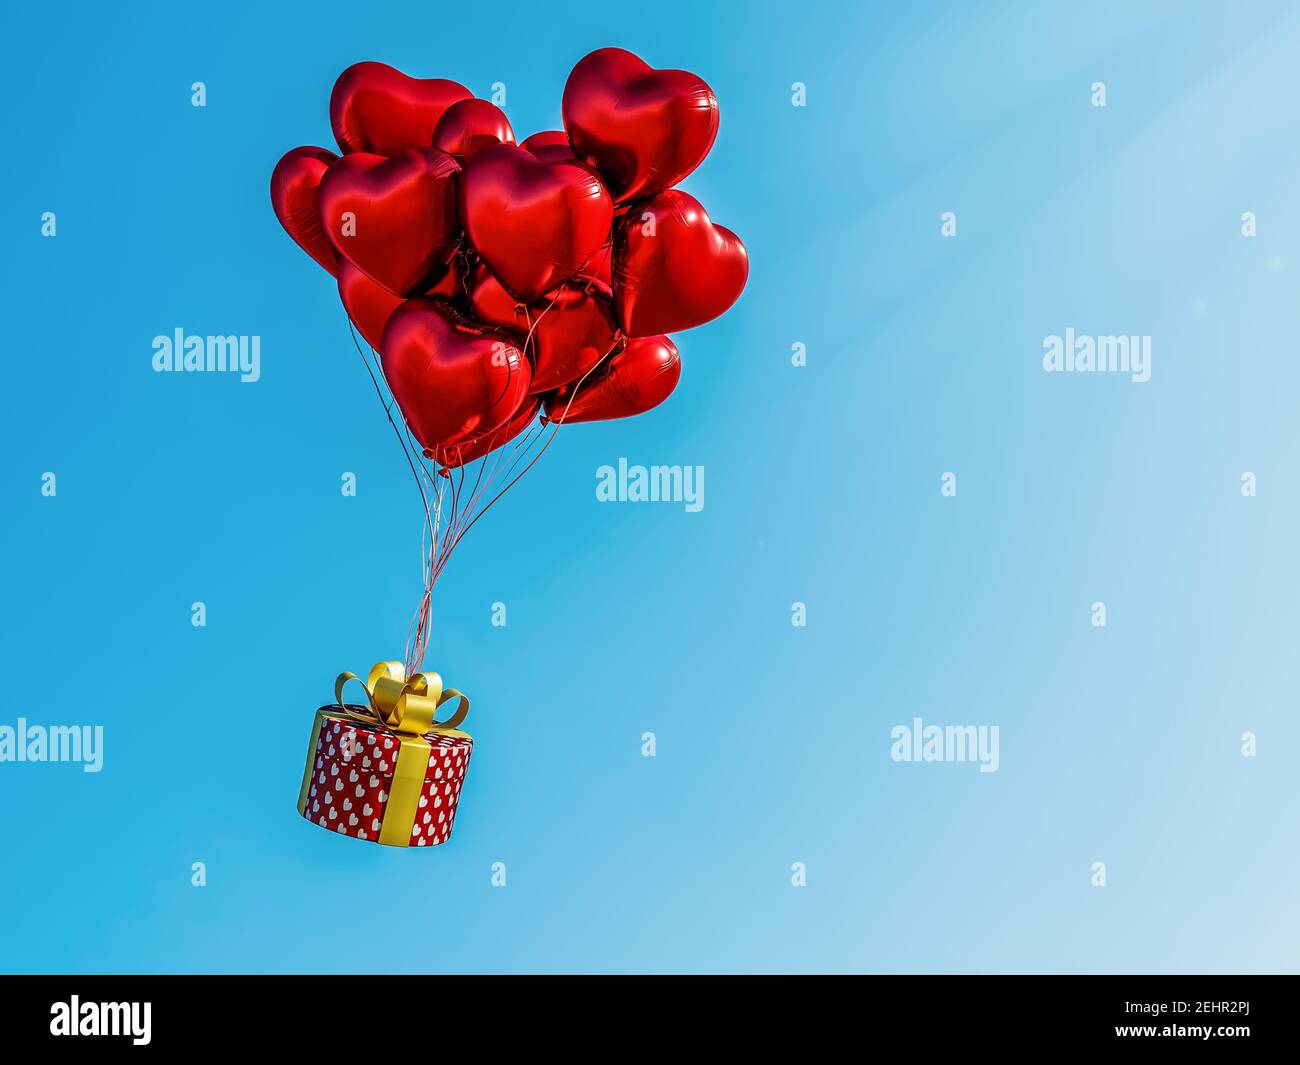 3D rendering of bunch of red heart-shaped balloons carrying gift box over the clear blue sky Stock Photo